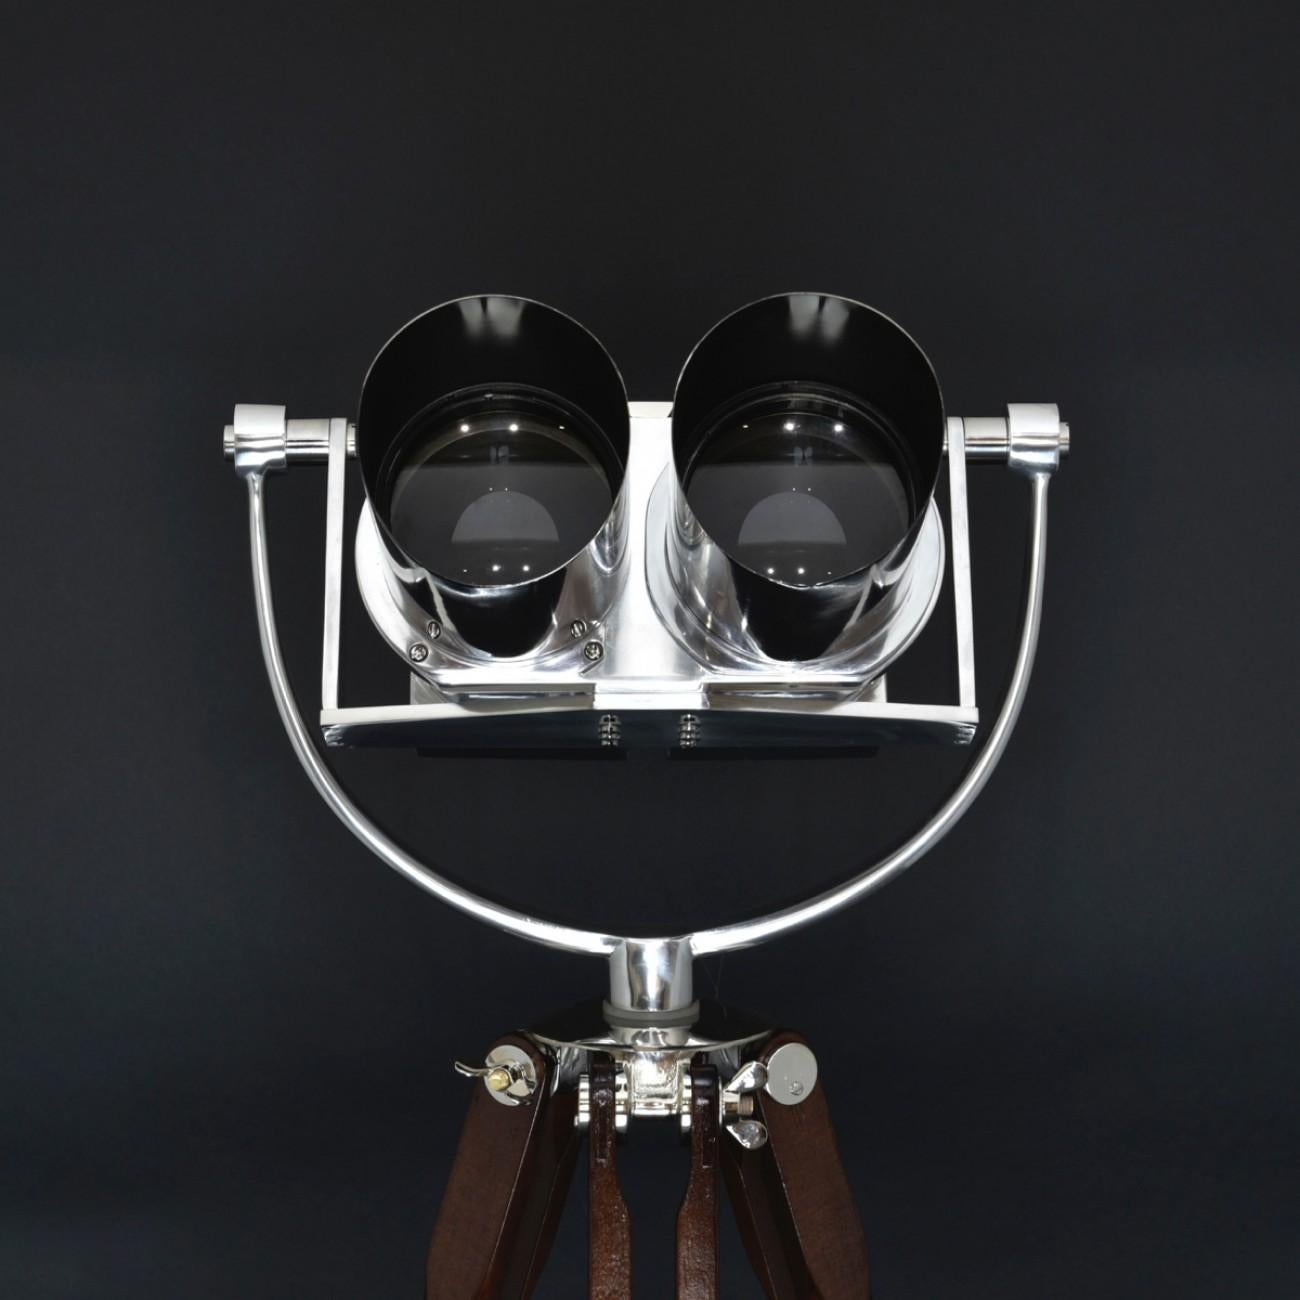 A superb 10 x 80 (10 power magnification and 80 mm objective lenses) double telescope binocular by Joseph Schneider of Germany with 45° inclined oculars and integral filters. This model of binocular was originally designed by Emil Busch in 1935,